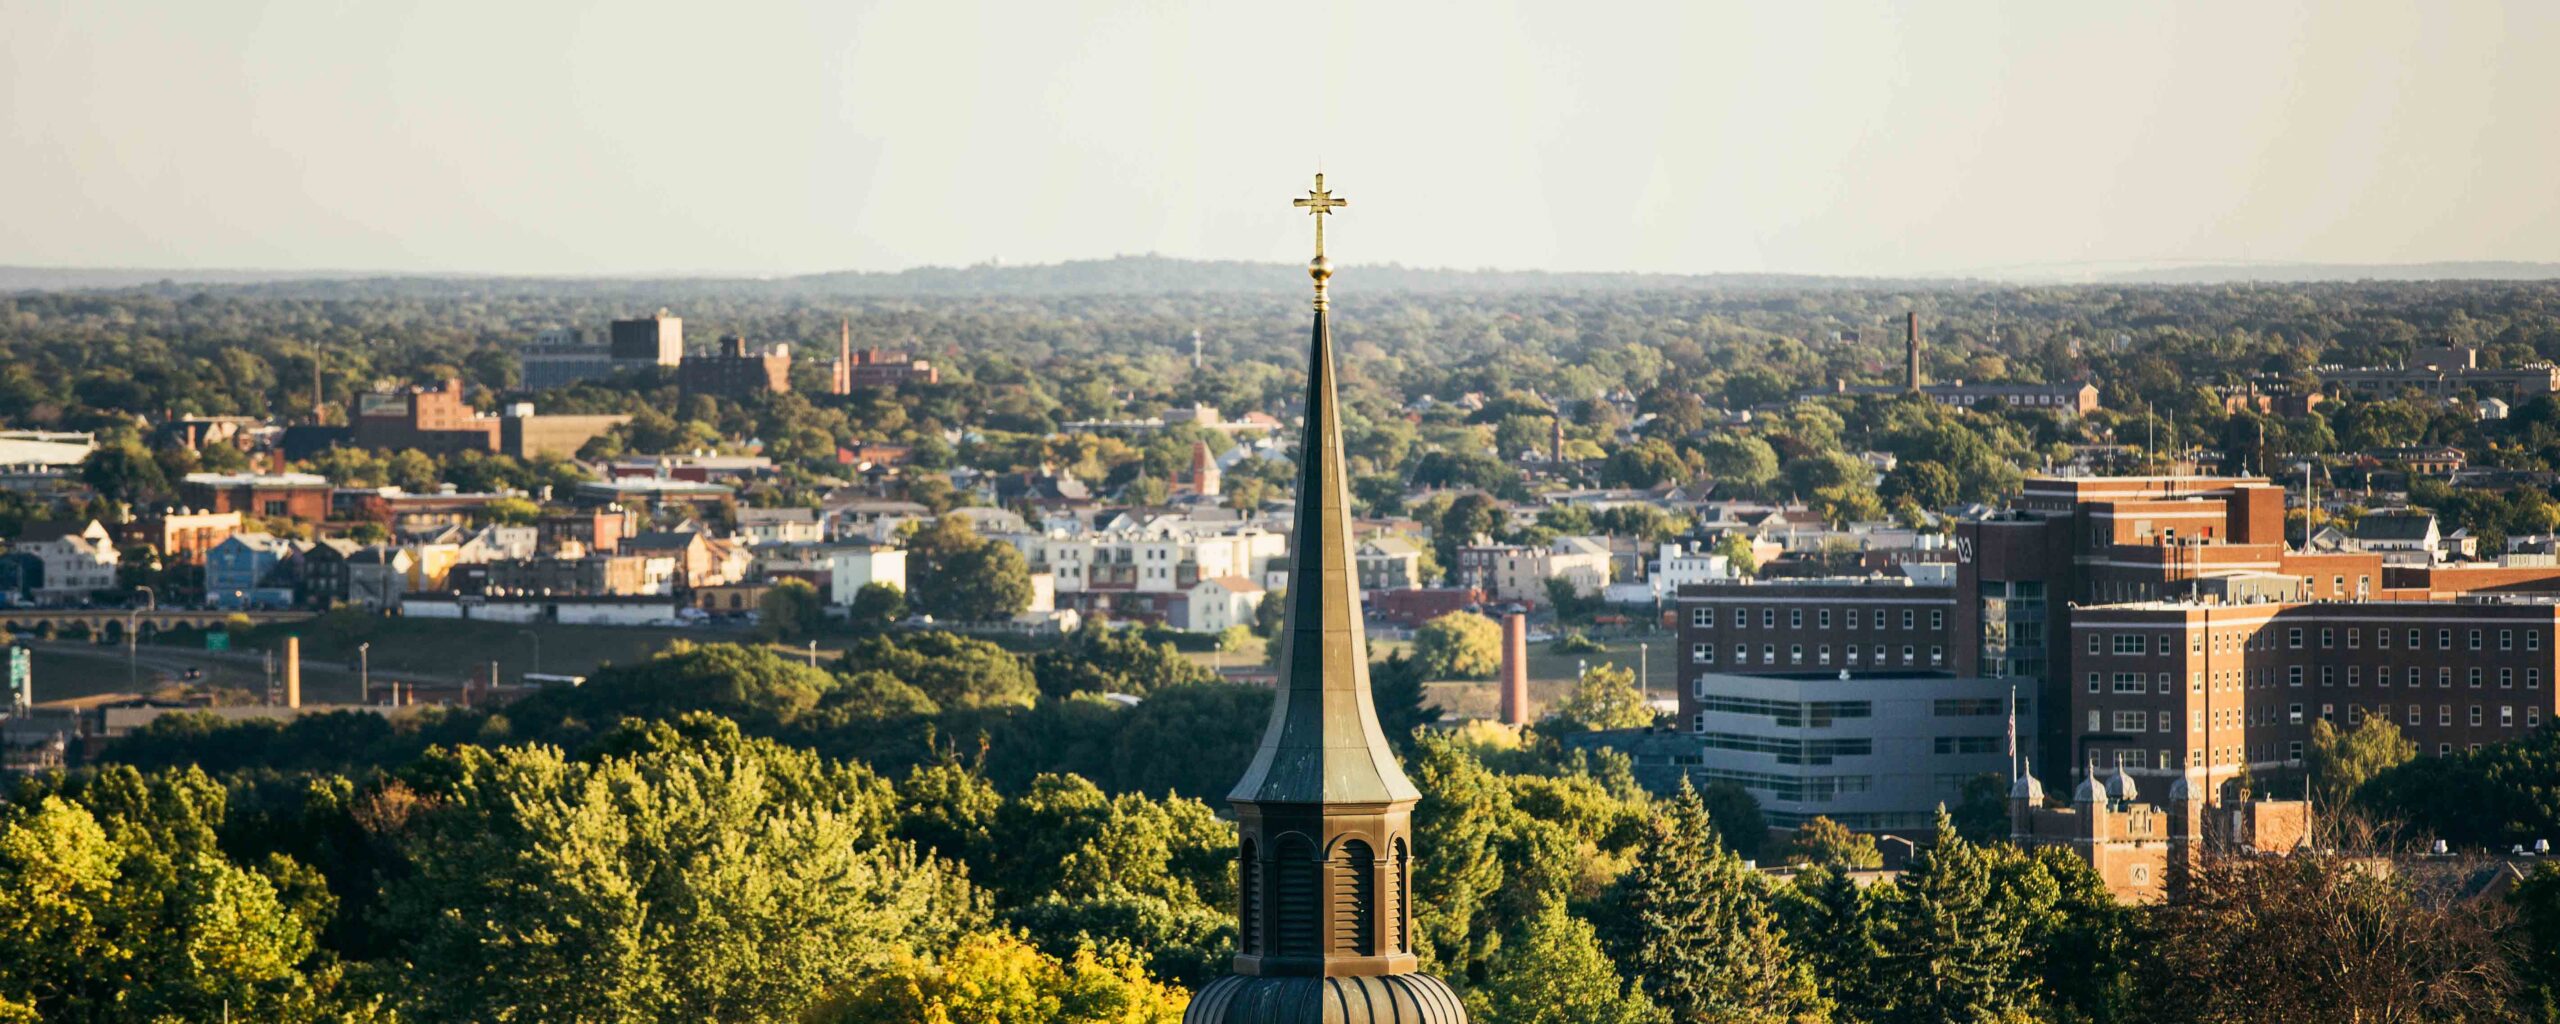 Steeple over view of City of Providence